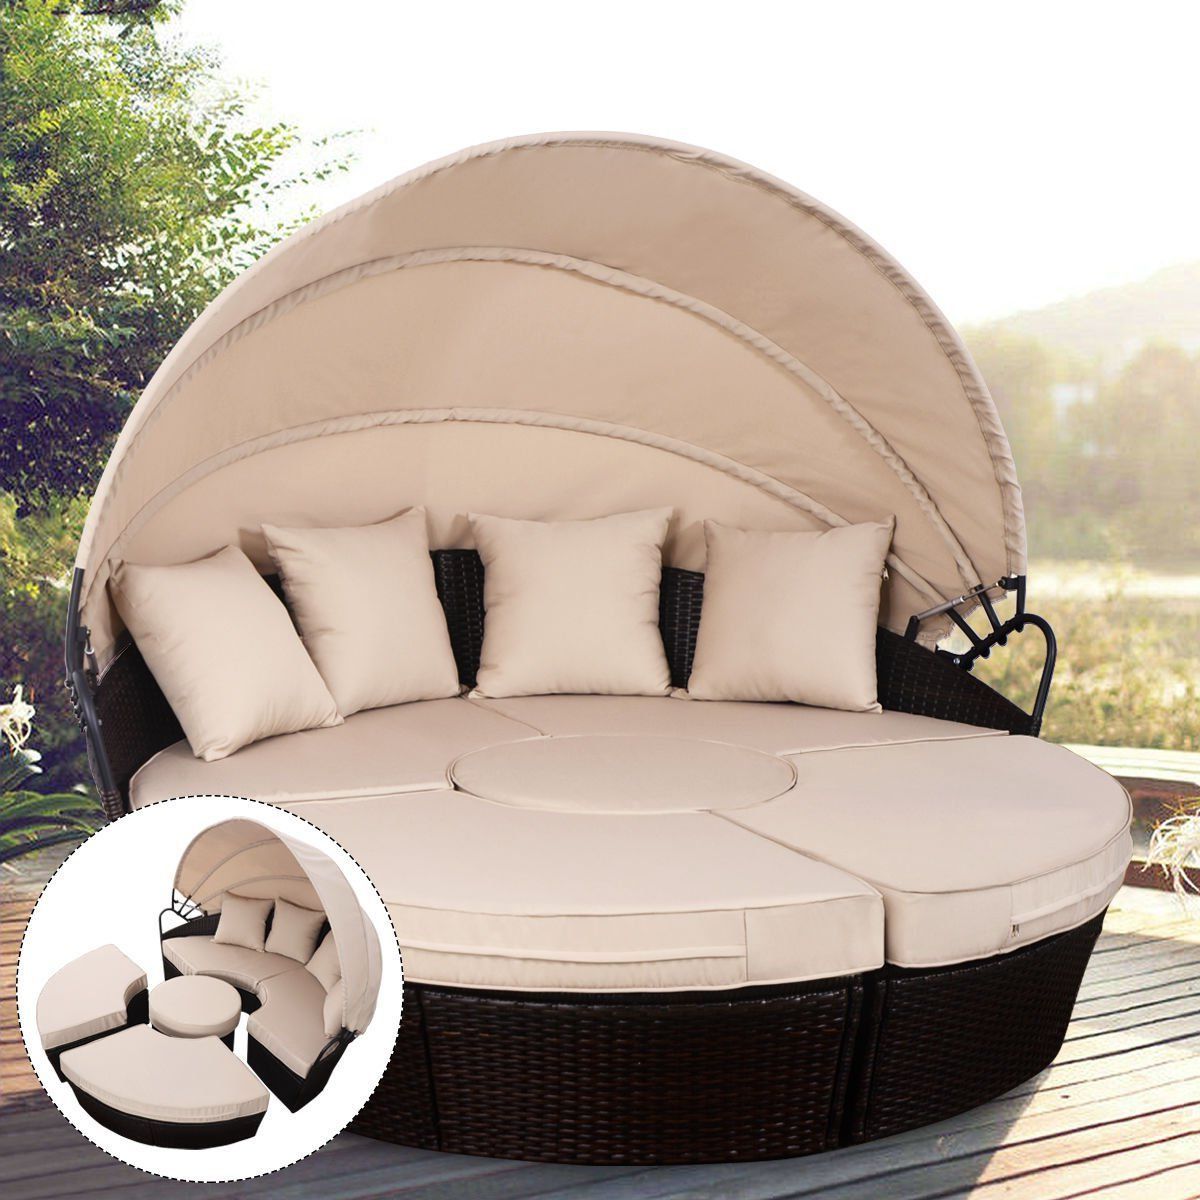 Behling Canopy Patio Daybeds With Cushions Inside Well Known Pin On Bkyd Furniture (View 5 of 25)